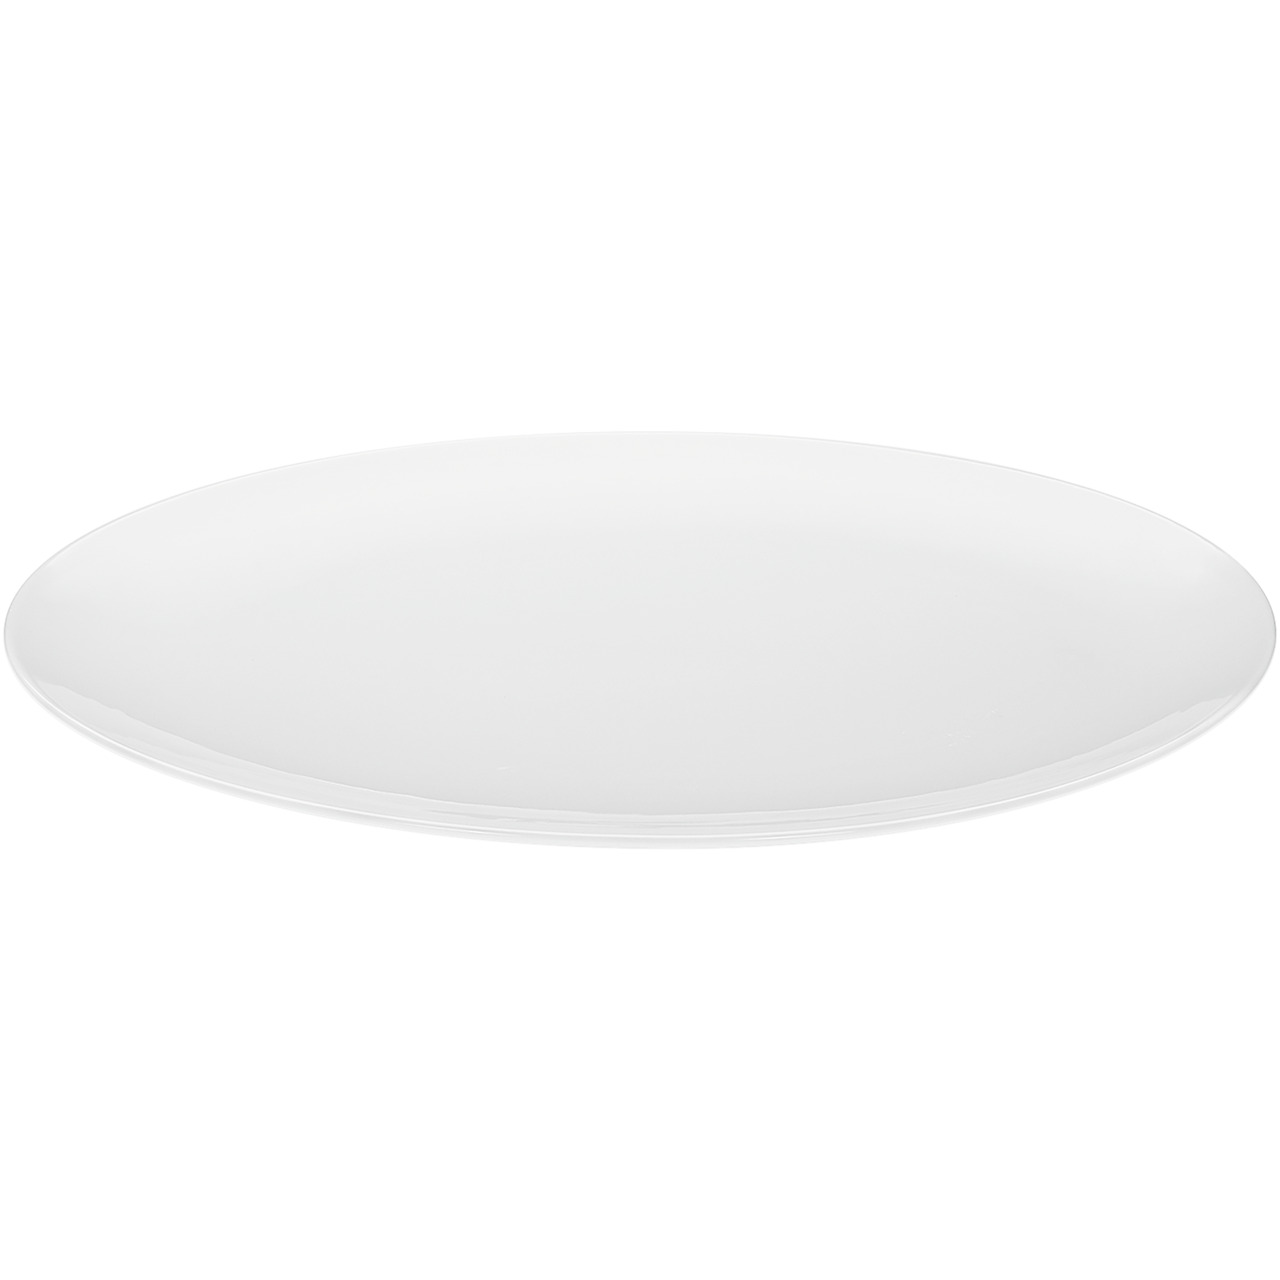 Unlimited, Coupplatte oval 380 x 265 mm